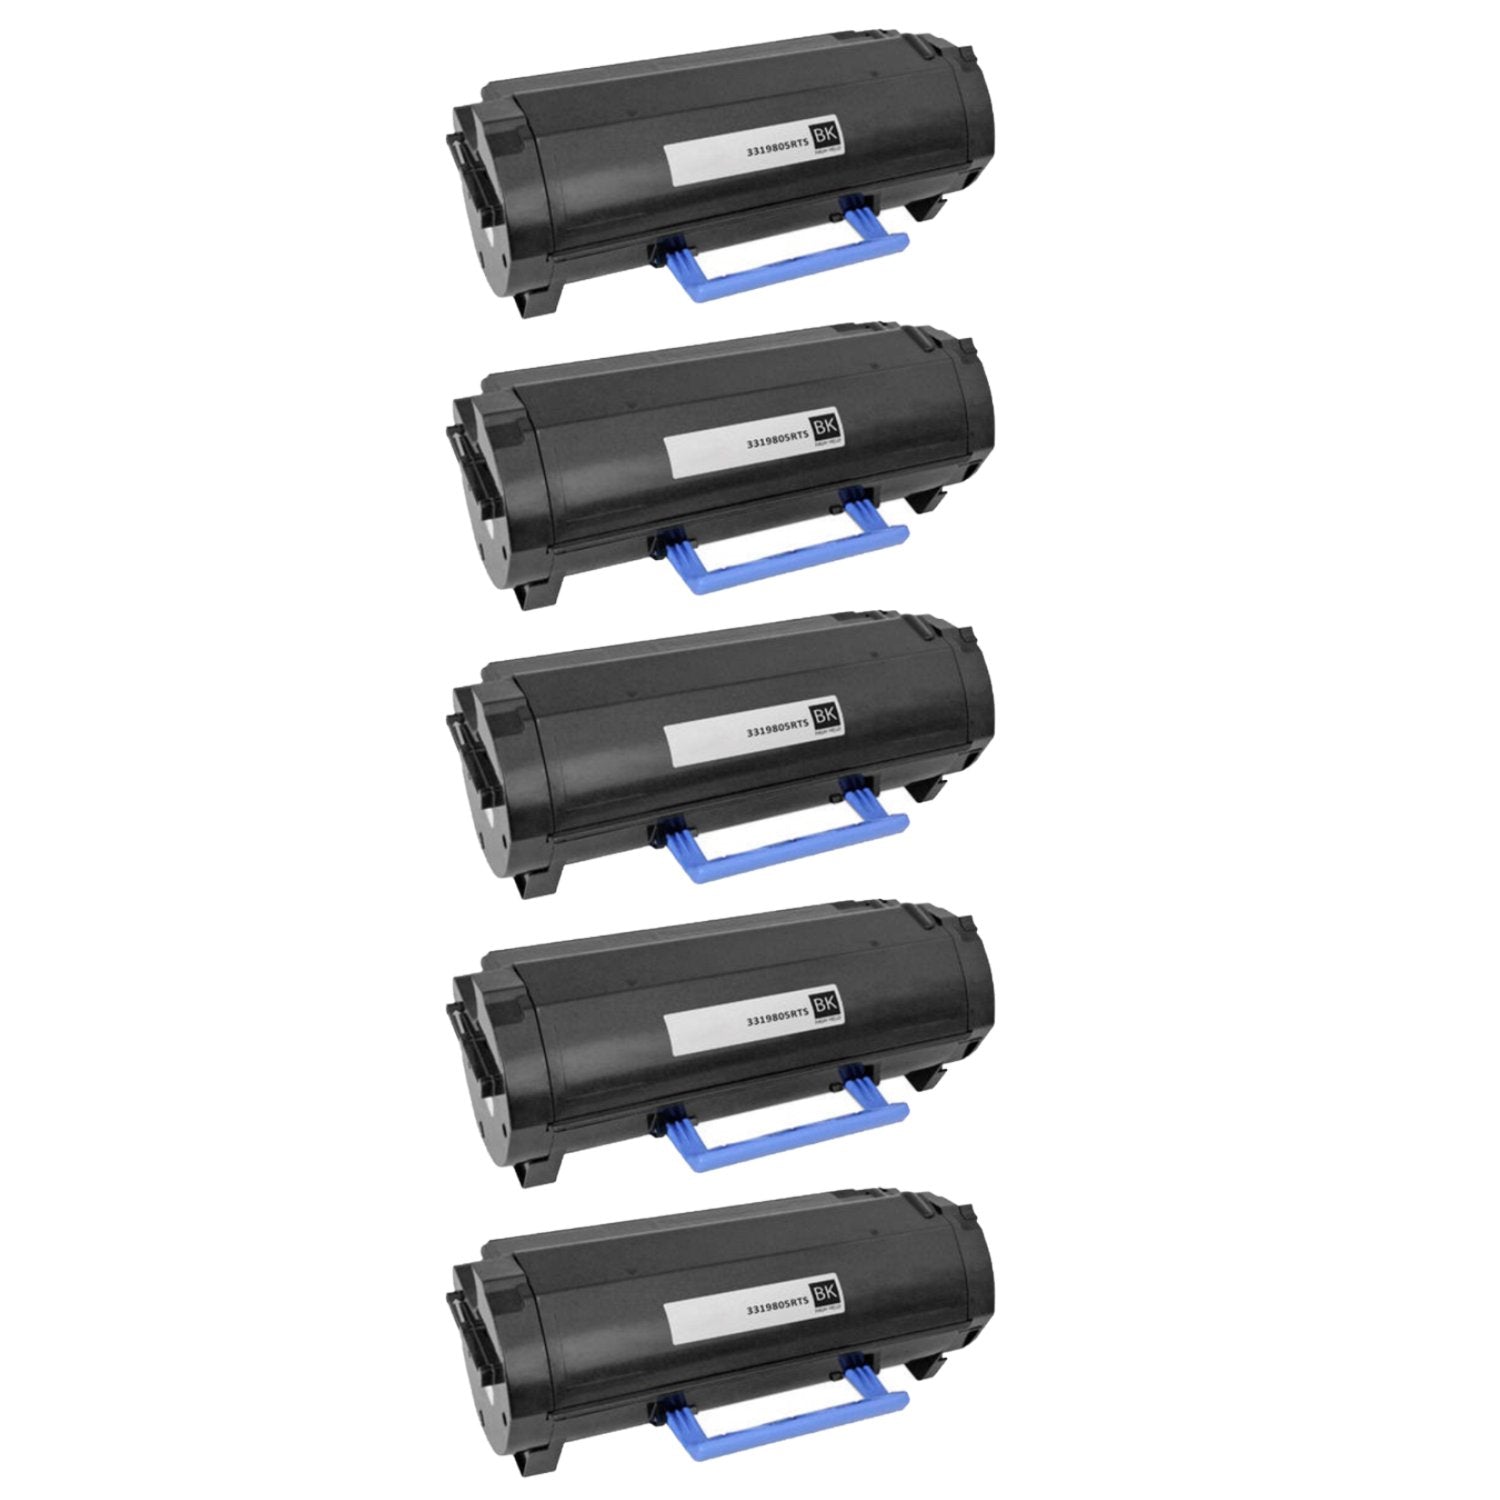 Absolute Toner Compatible Dell 331-9805 High Yield Black Toner Cartridge | Absolute Toner Dell Toner Cartridges